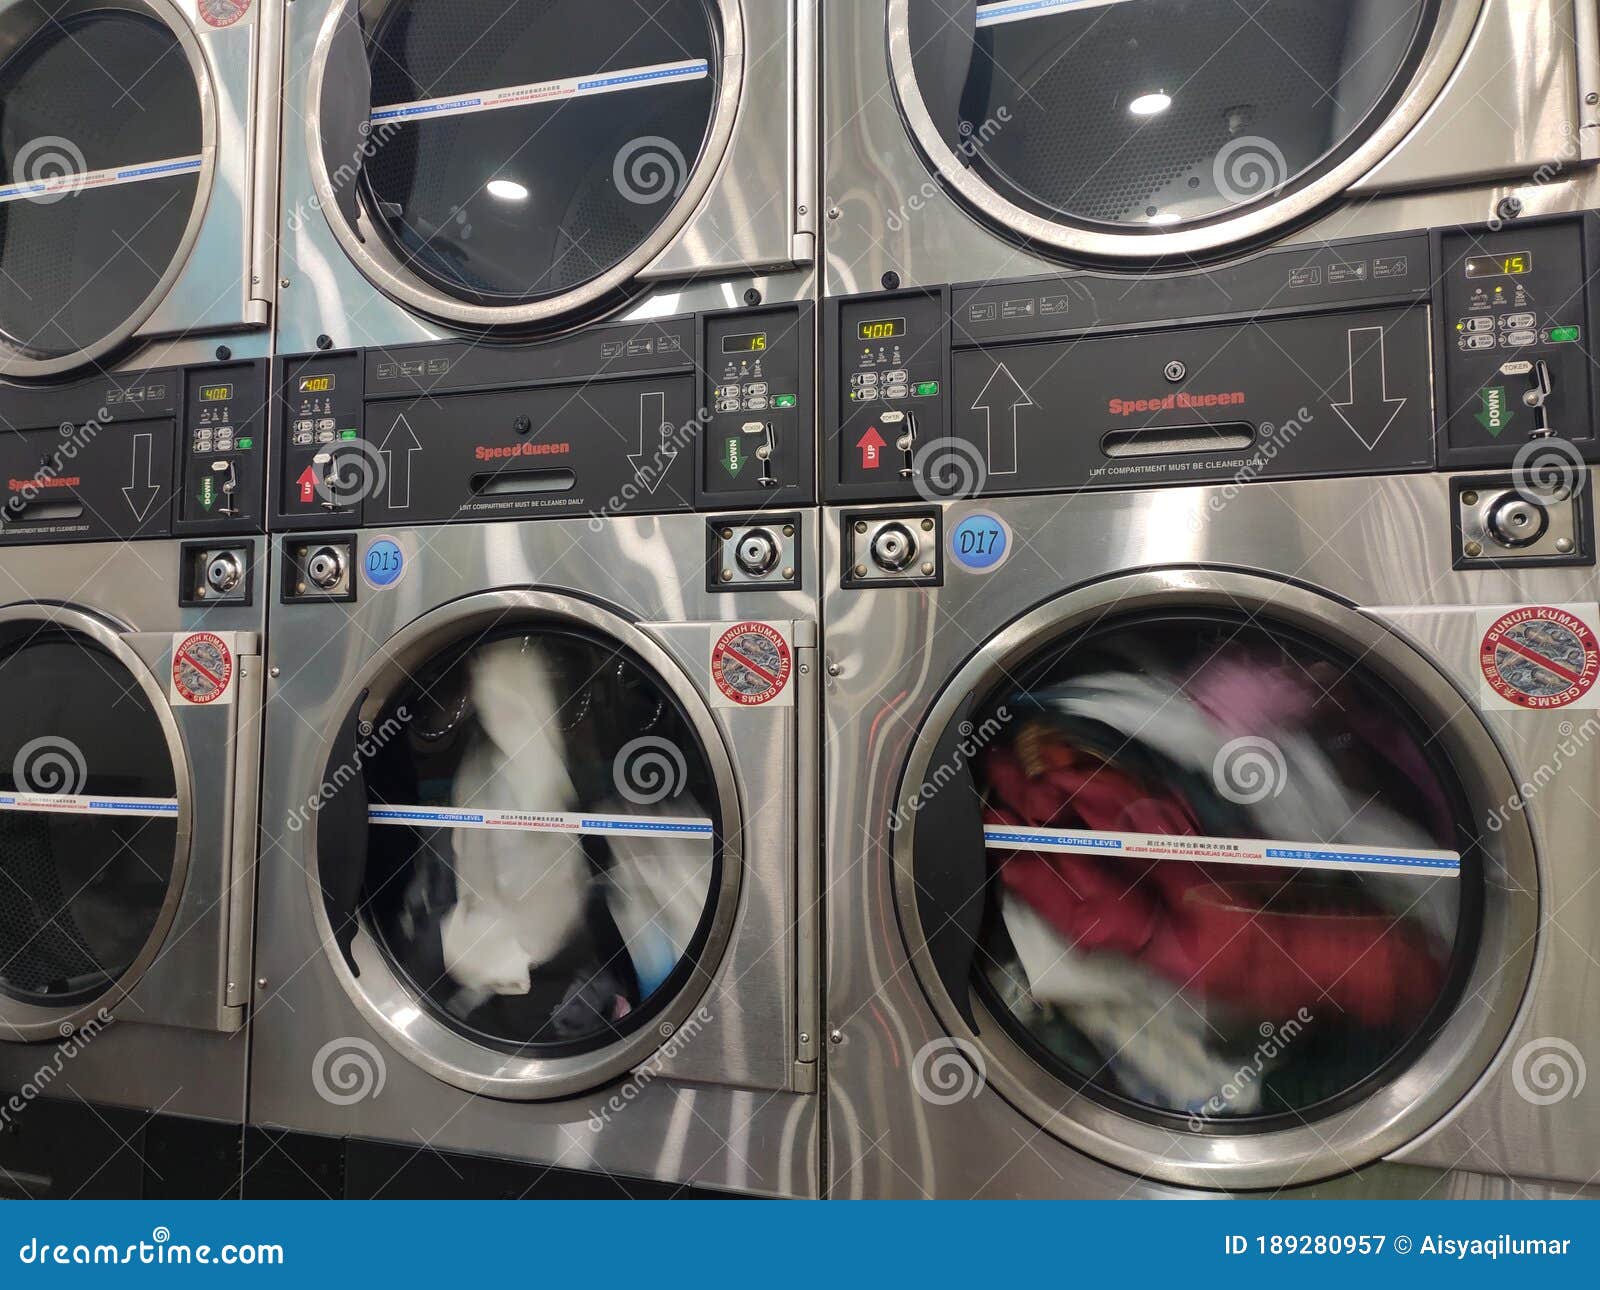 laundry-machines-outlet-provides-self-service-laundry-drying-machines-open-hours-kuala-lumpur-malaysia-march-laundry-189280957.jpg